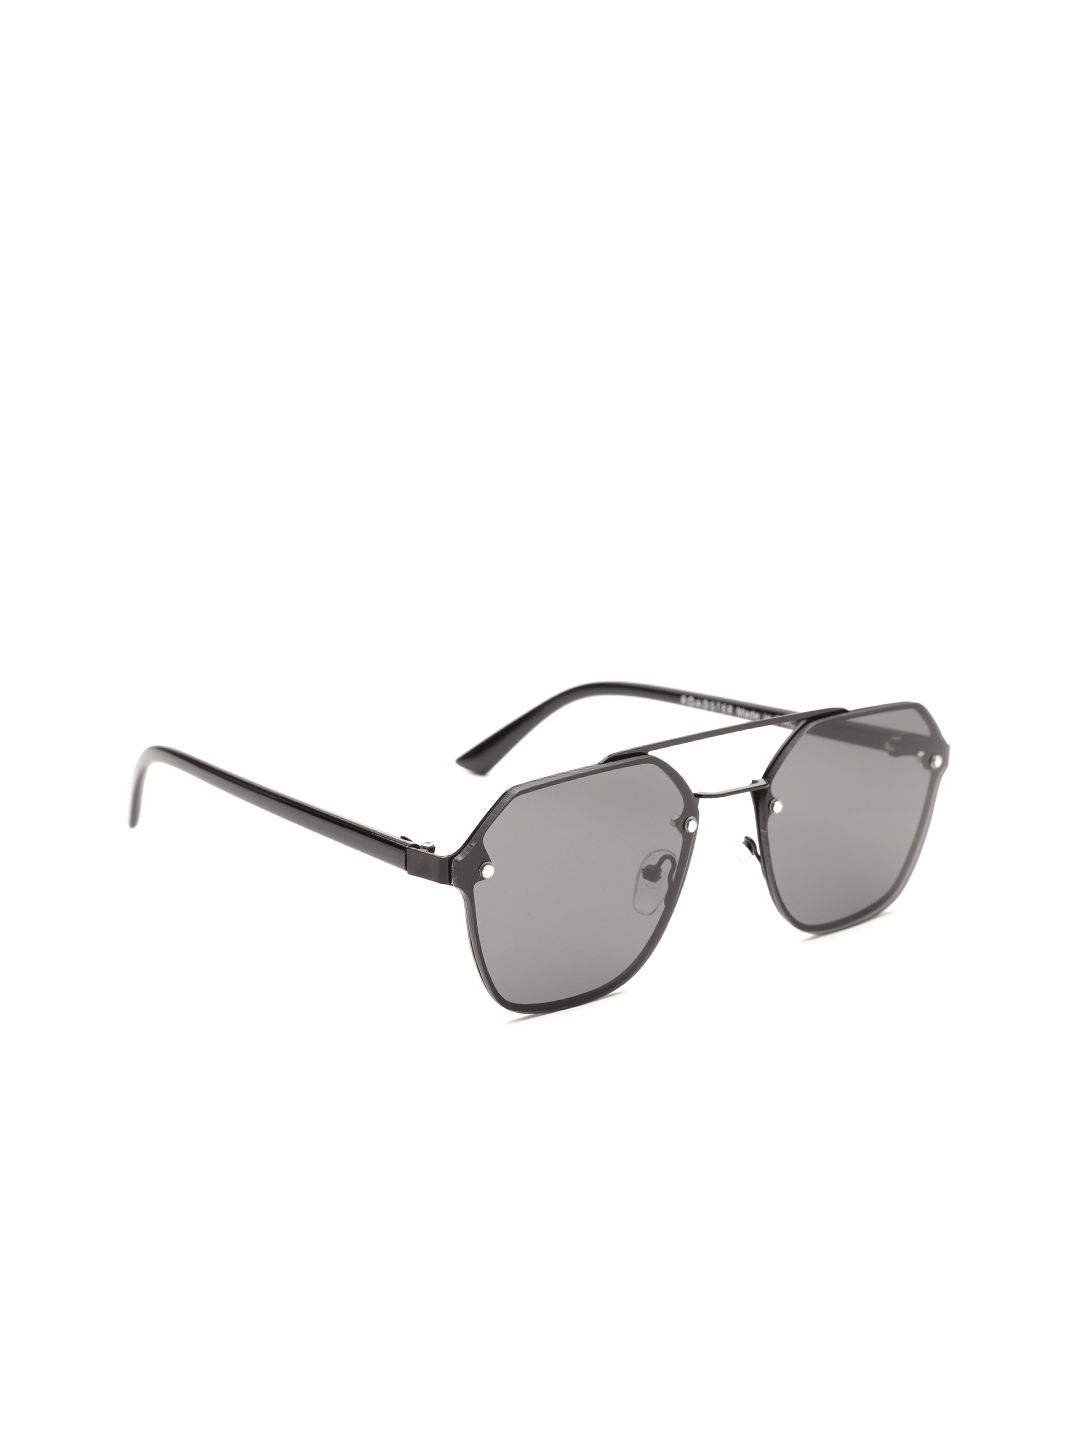 The Roadster Lifestyle Co Unisex Square Sunglasses MFB-PN-PS-T9578 Price in India